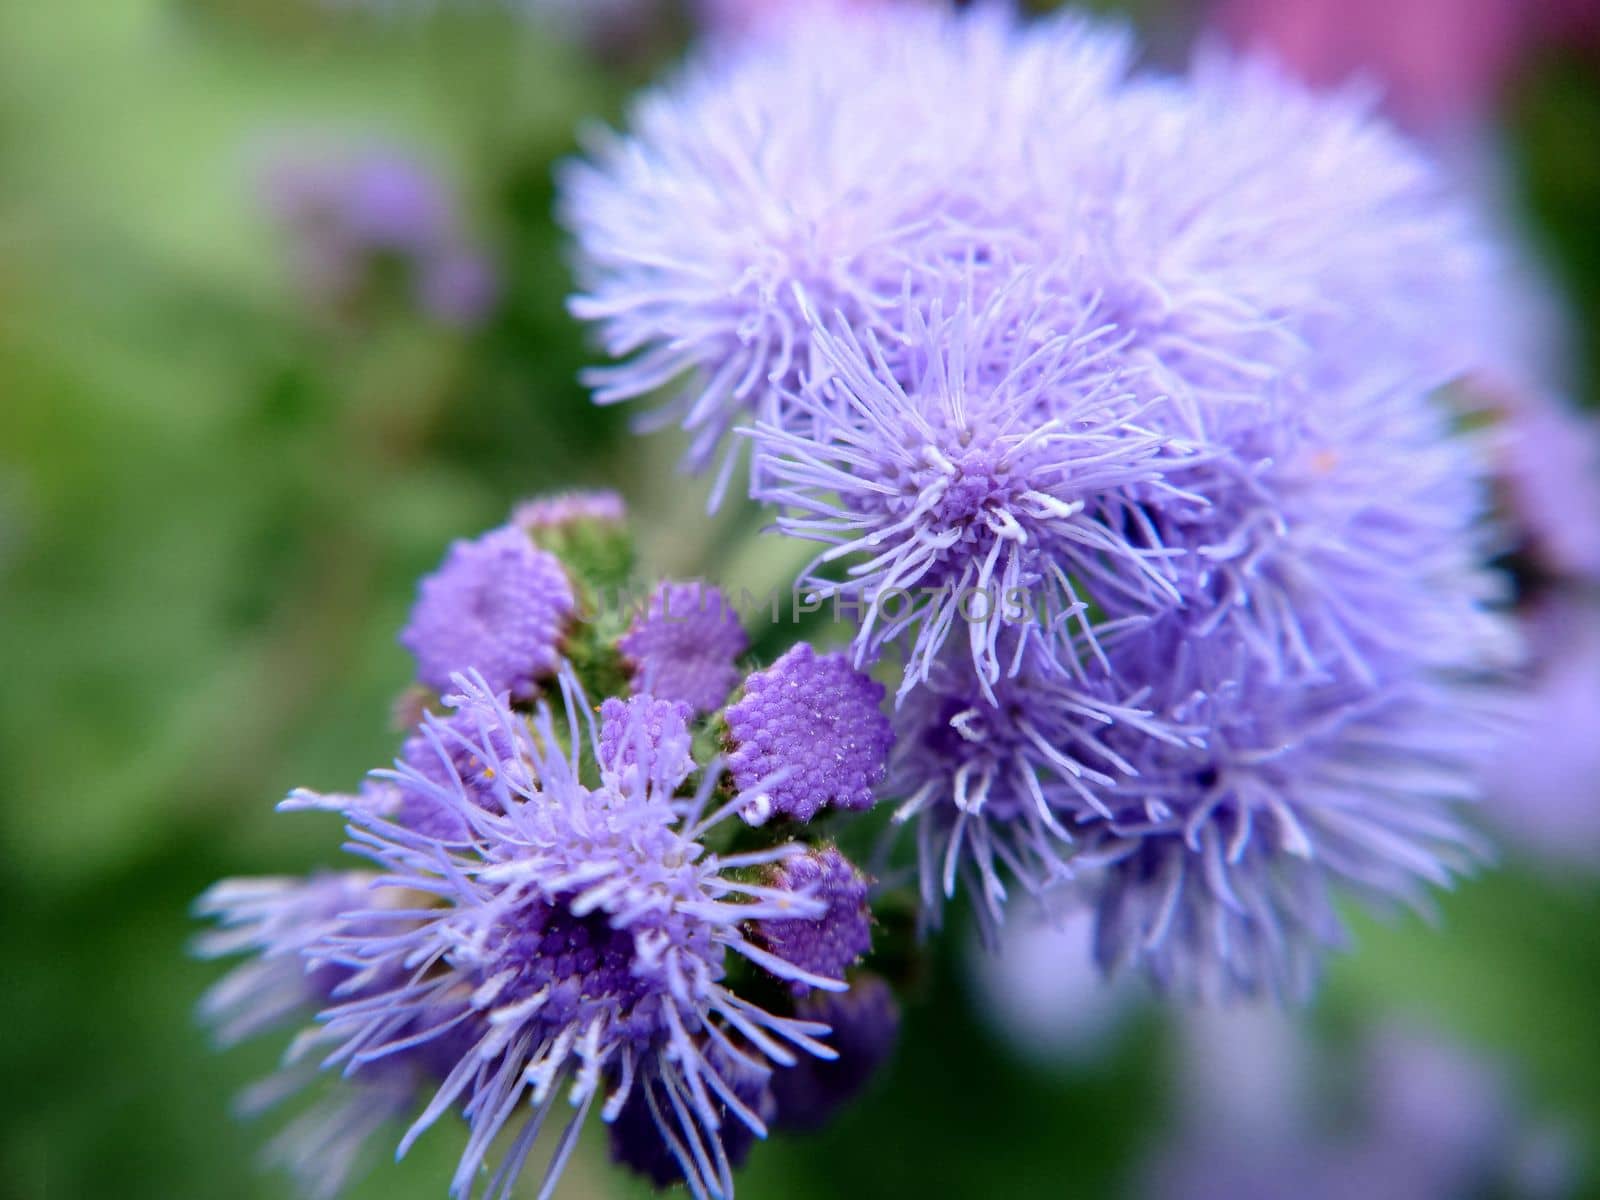 A large group of blue flowers of the Ageratum houstonianum plant, commonly known as the loss flower, blue mink, blue weed textured floral background